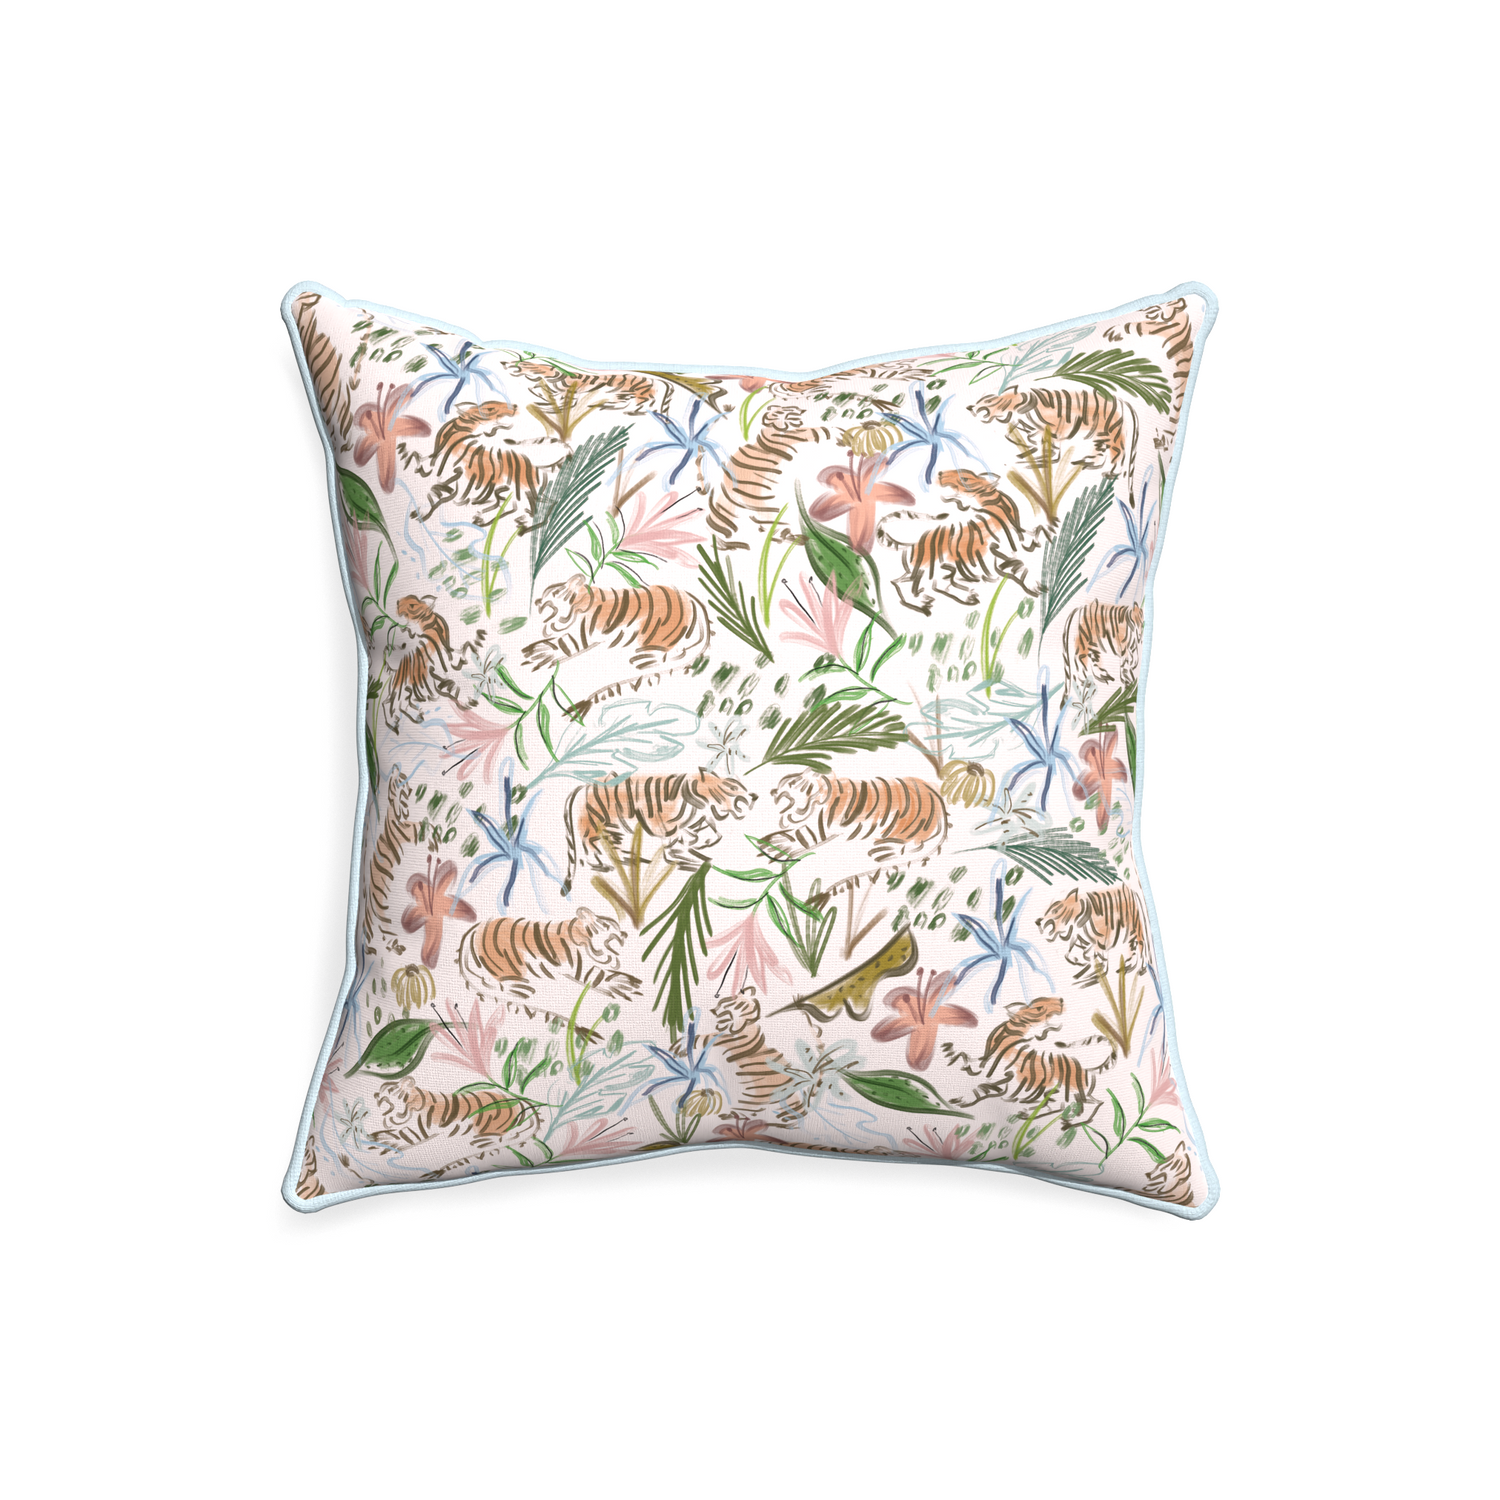 20-square frida pink custom pink chinoiserie tigerpillow with powder piping on white background